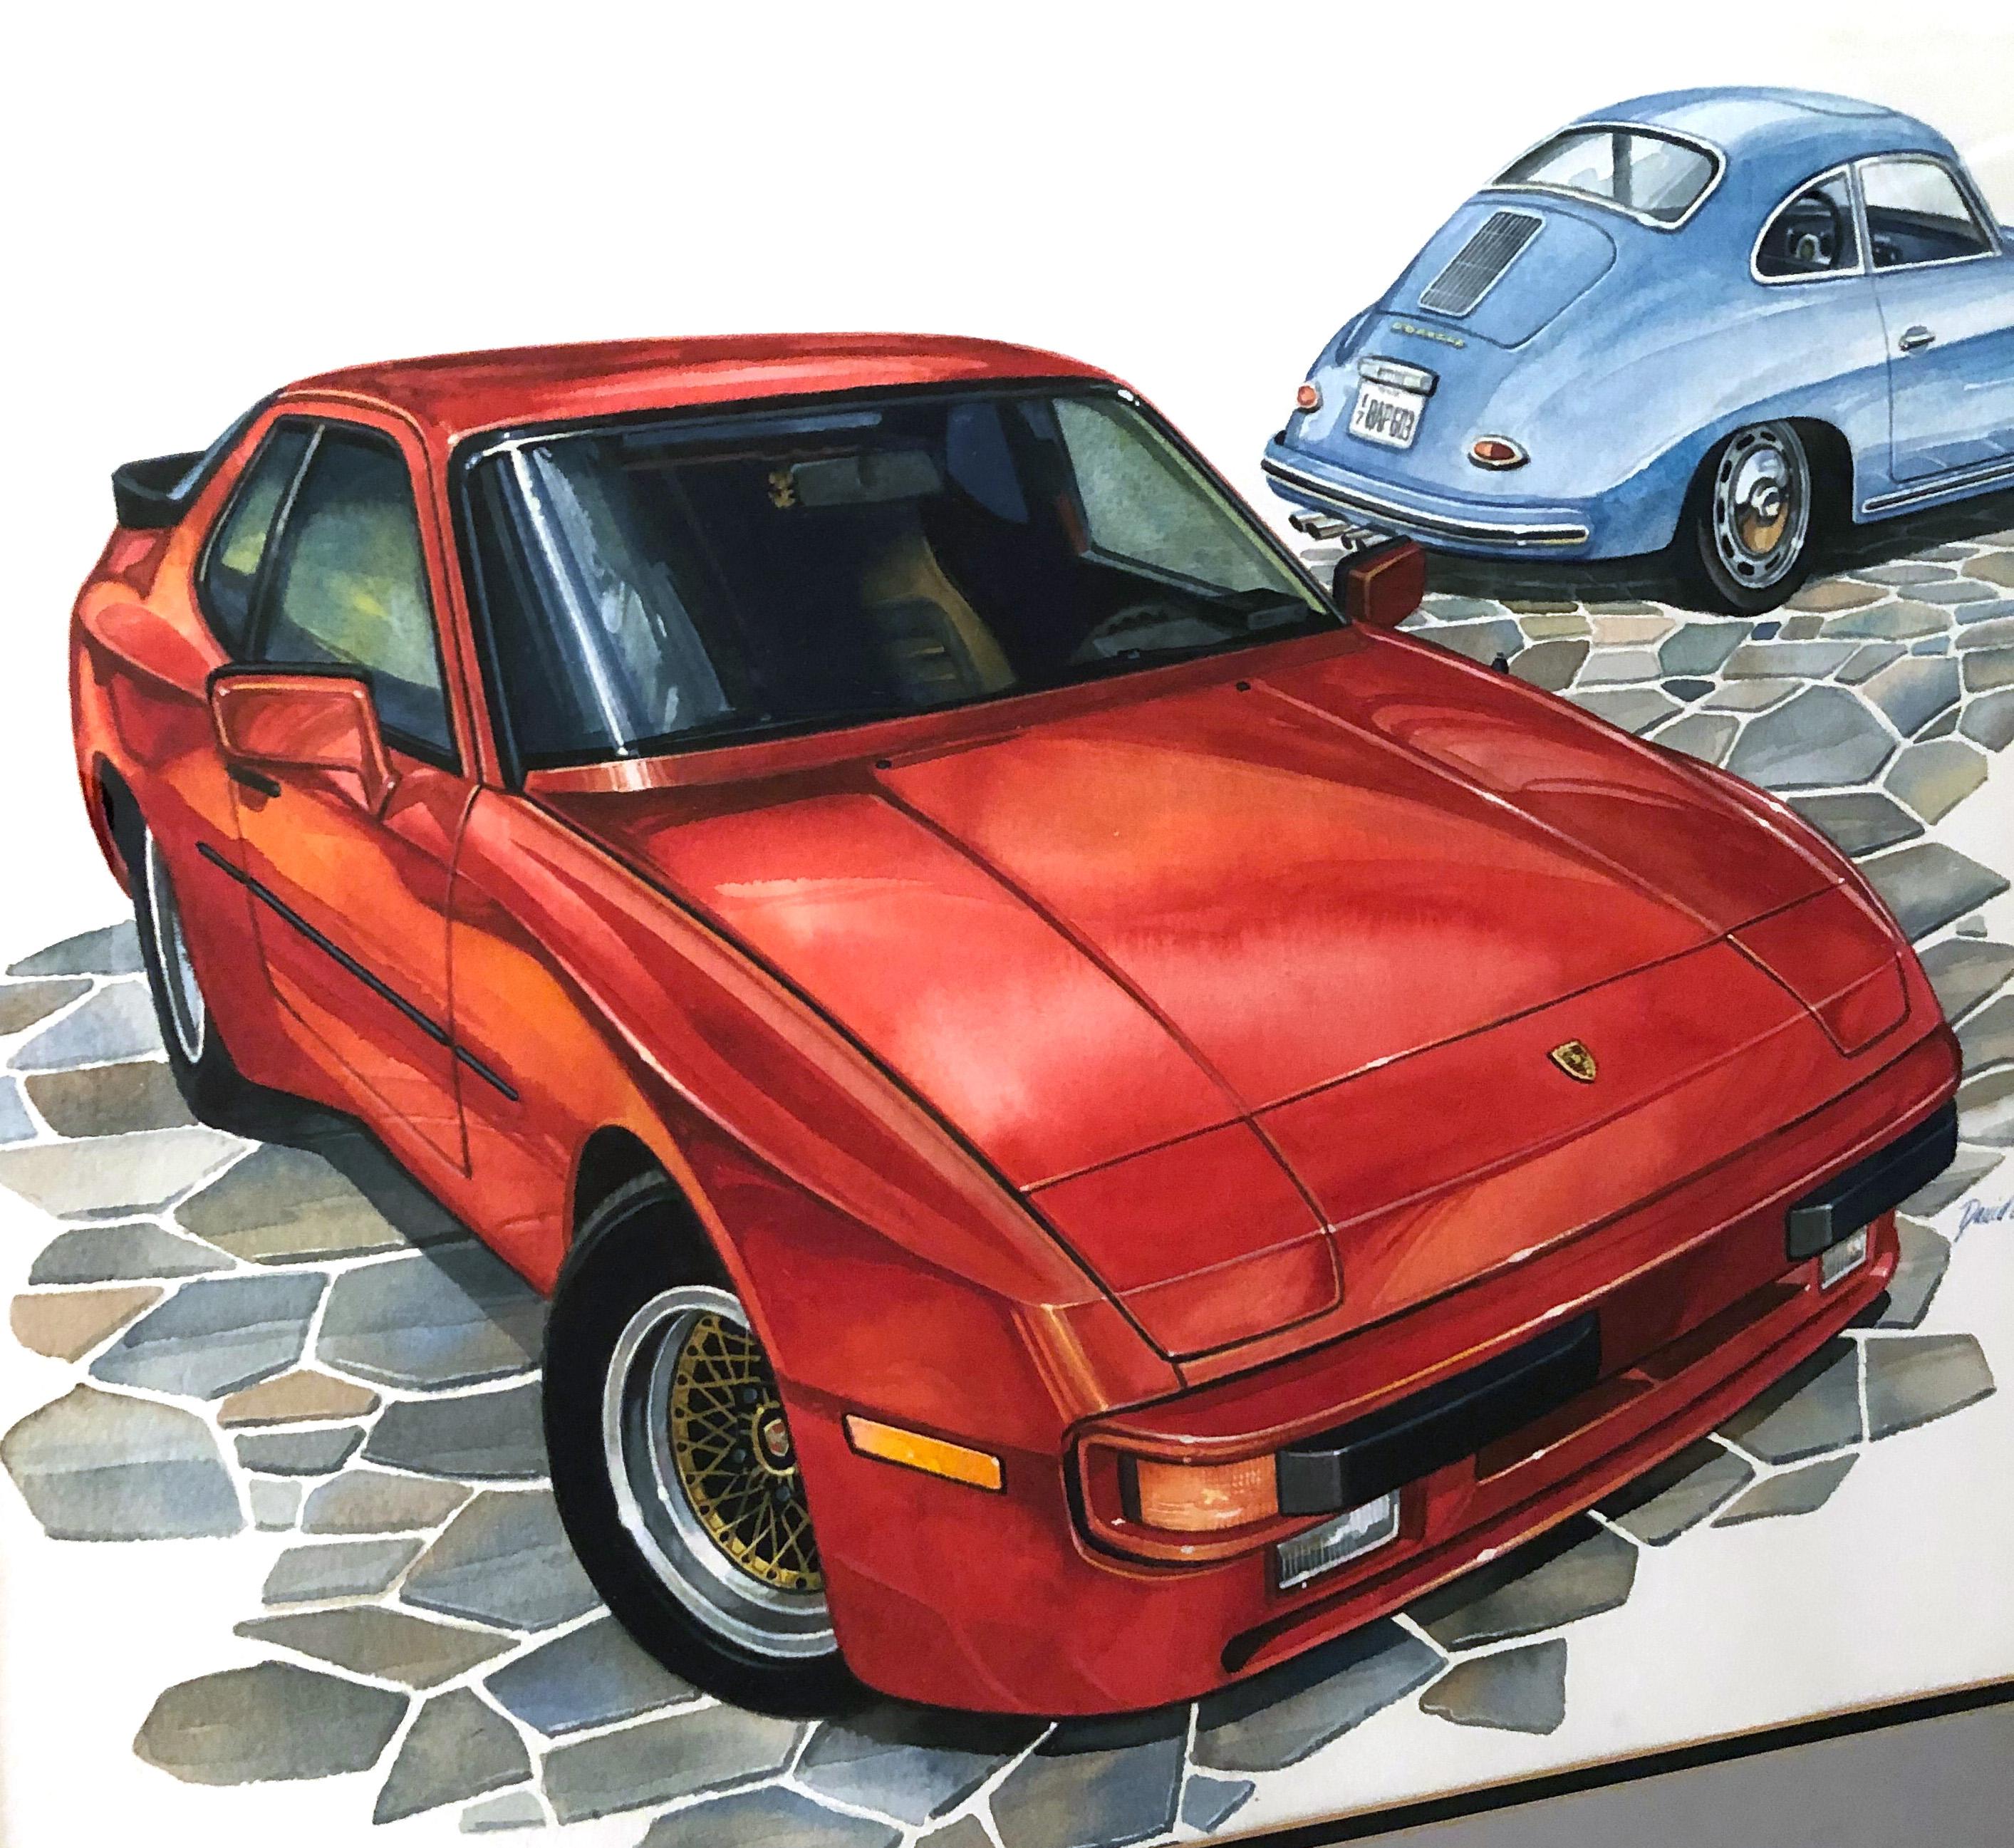 Extraordinary watercolor on paper of two Porsche automobiles, a 944 and a 356 by famed automotive and aviation artist David Lord. Signed and dated, 1985. 

Image dimensions: 16.75” x 20.75”. 
Chromed frame dimensions: 24.25” x 27.25”.

About